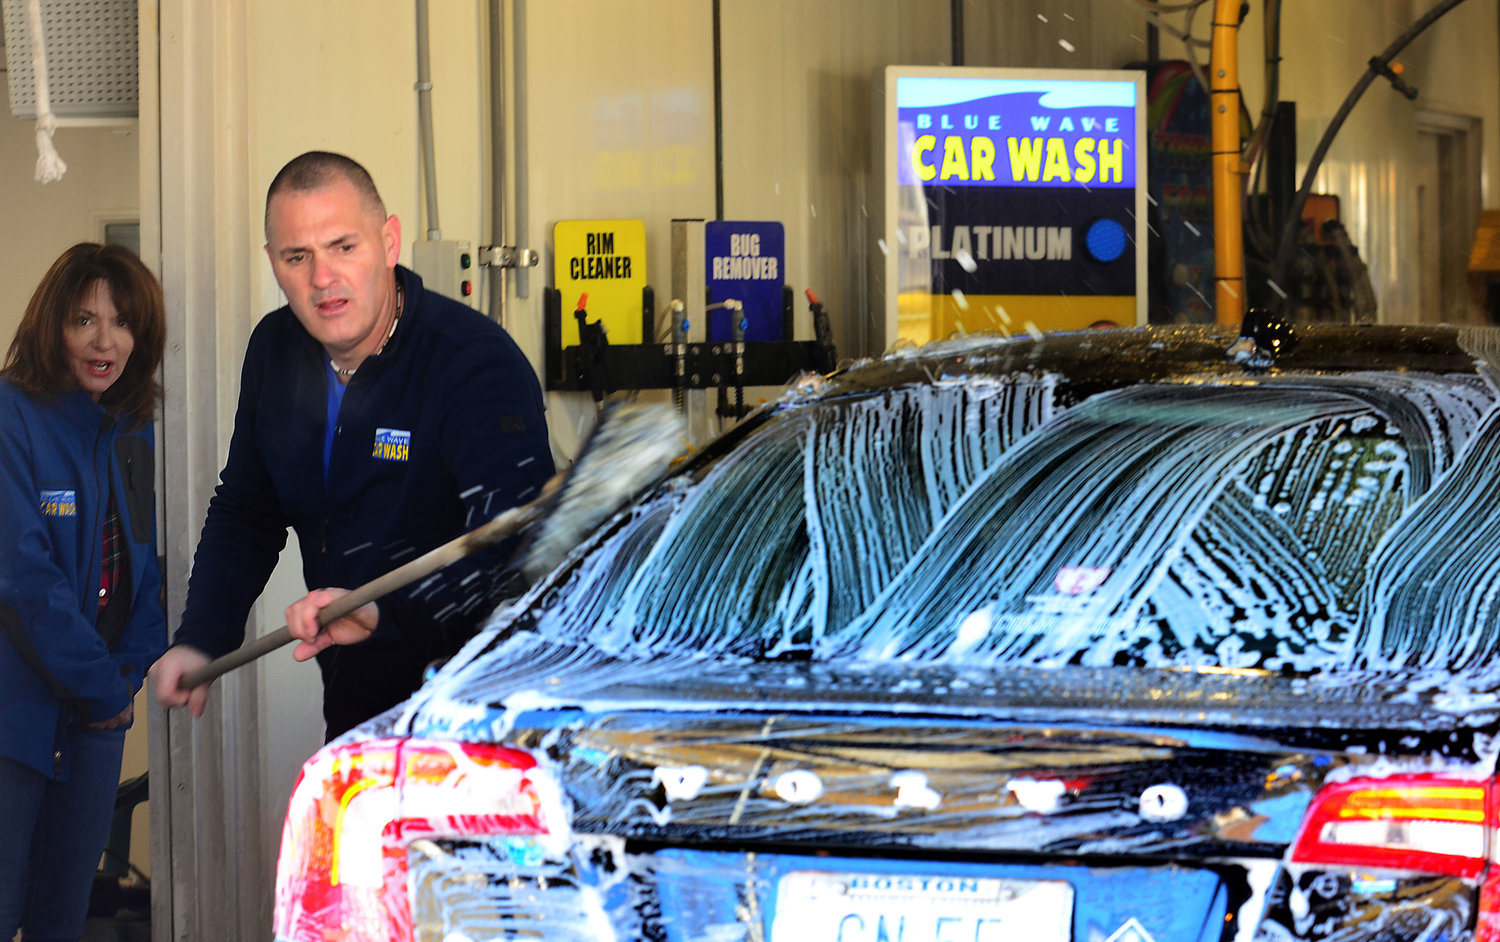 Blue Wave car wash owner Yvonne Blackman looks on as manager Pete Fabiano brushes down a client’s car with a soft cloth before it heads to the first stage of the car wash.